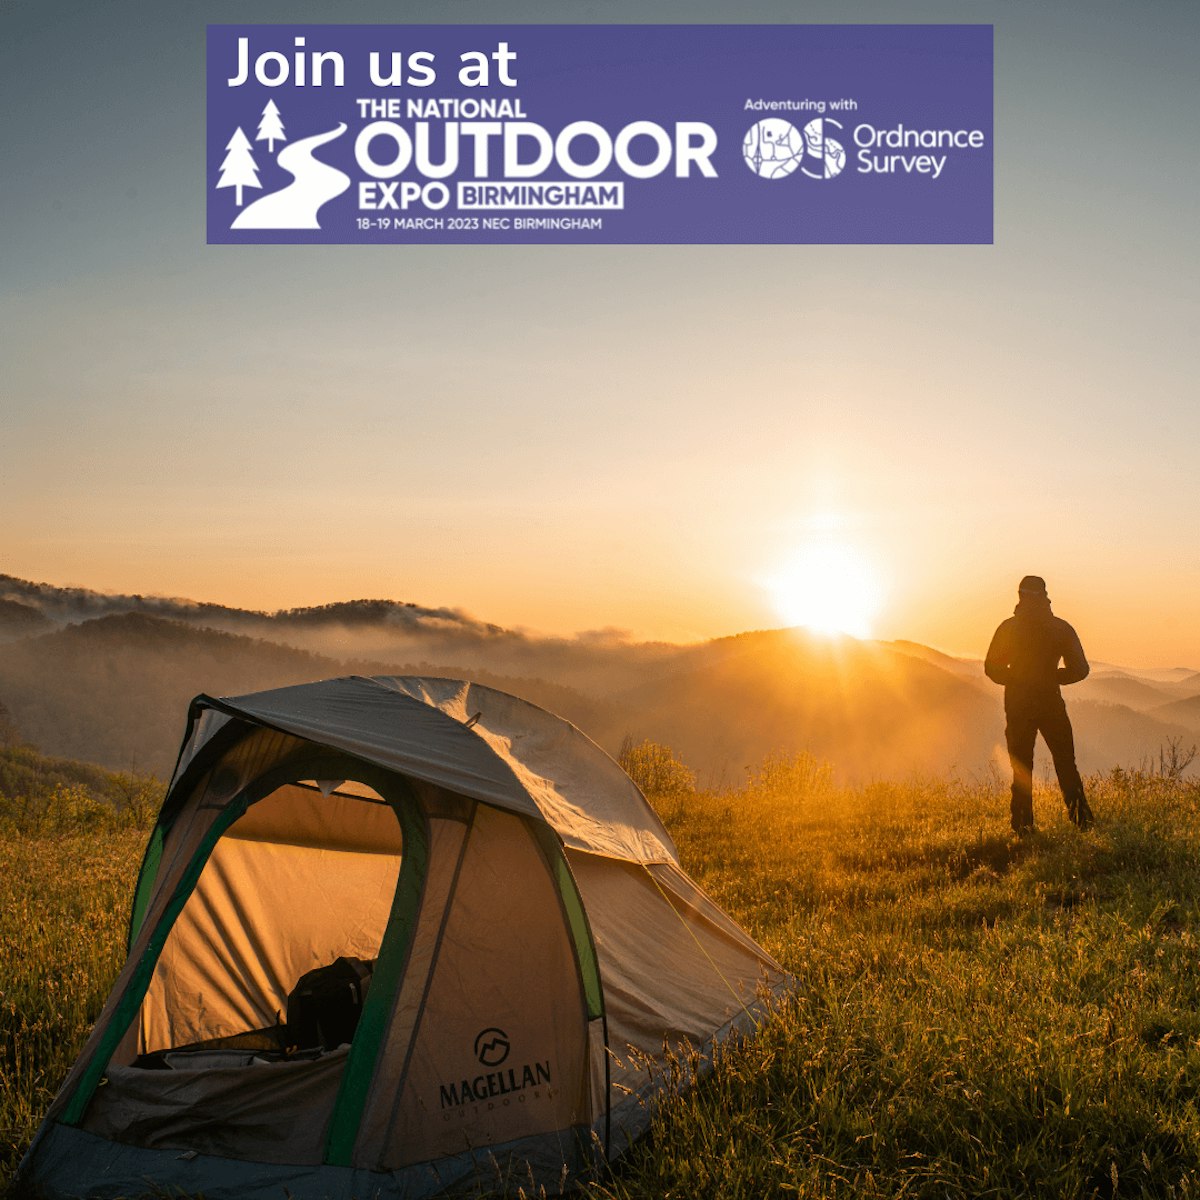 The National Outdoor Expo LFTO